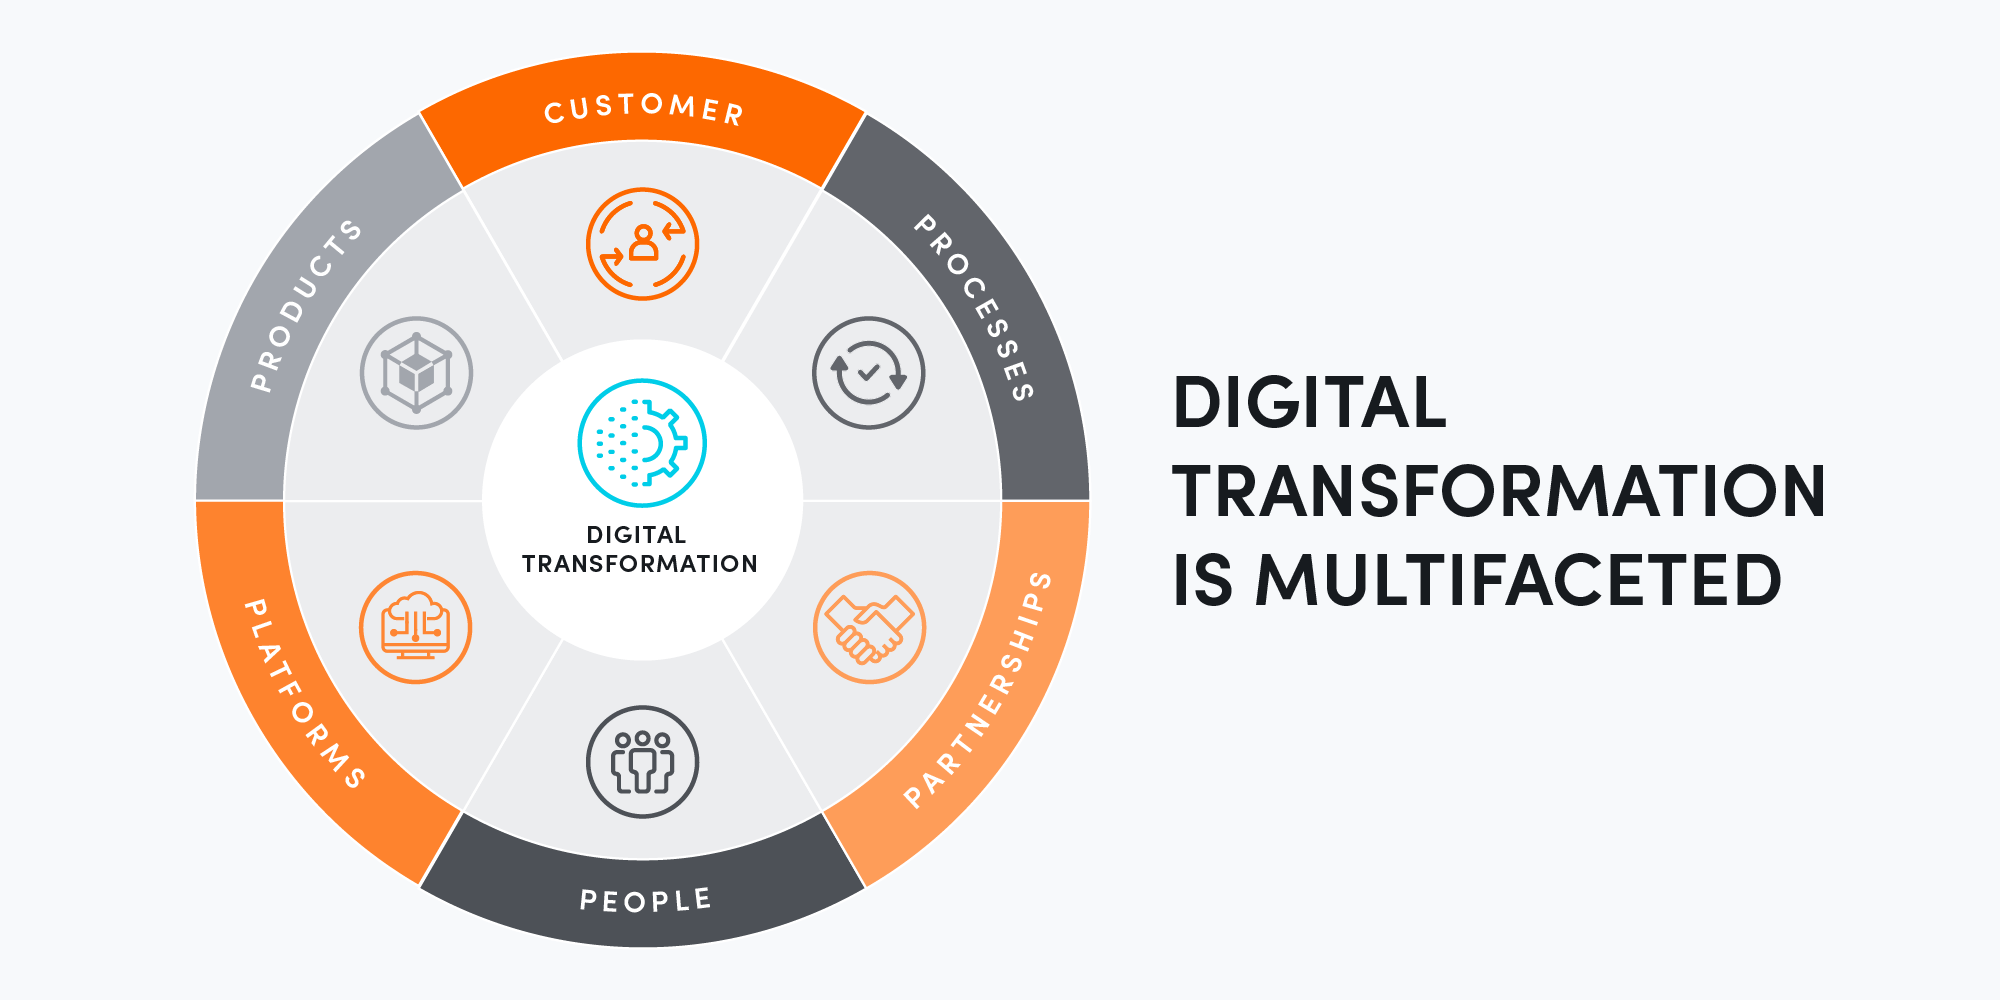 Digital transformation is multi-faceted